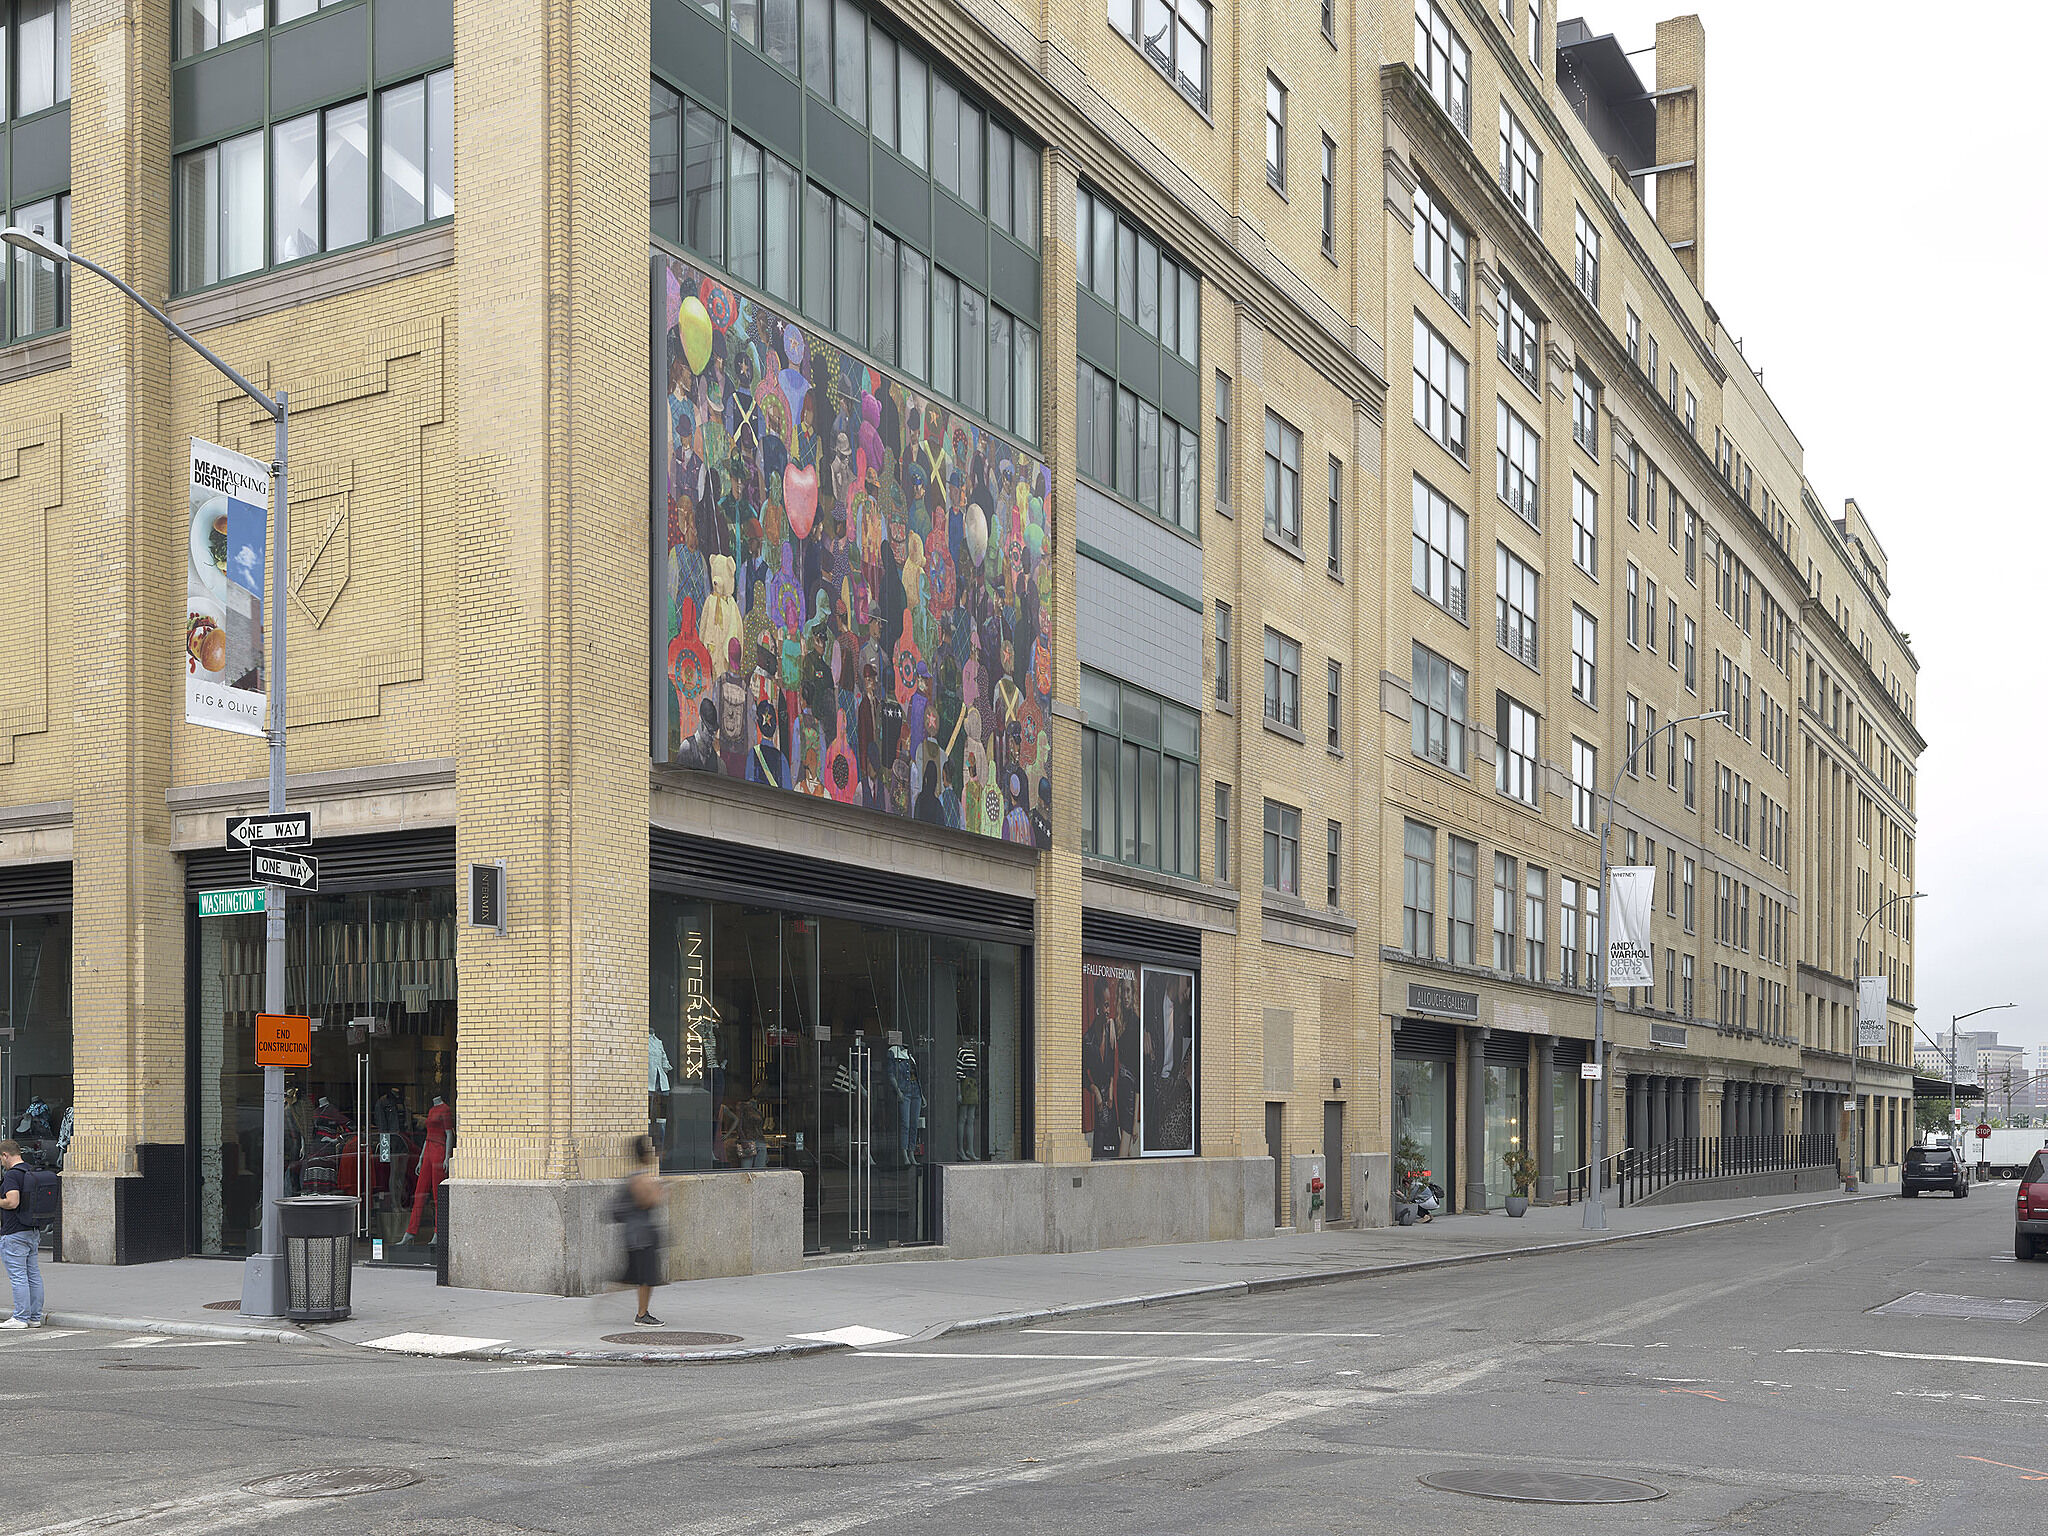 An installation image of a billboard artwork across from the Whitney Museum.